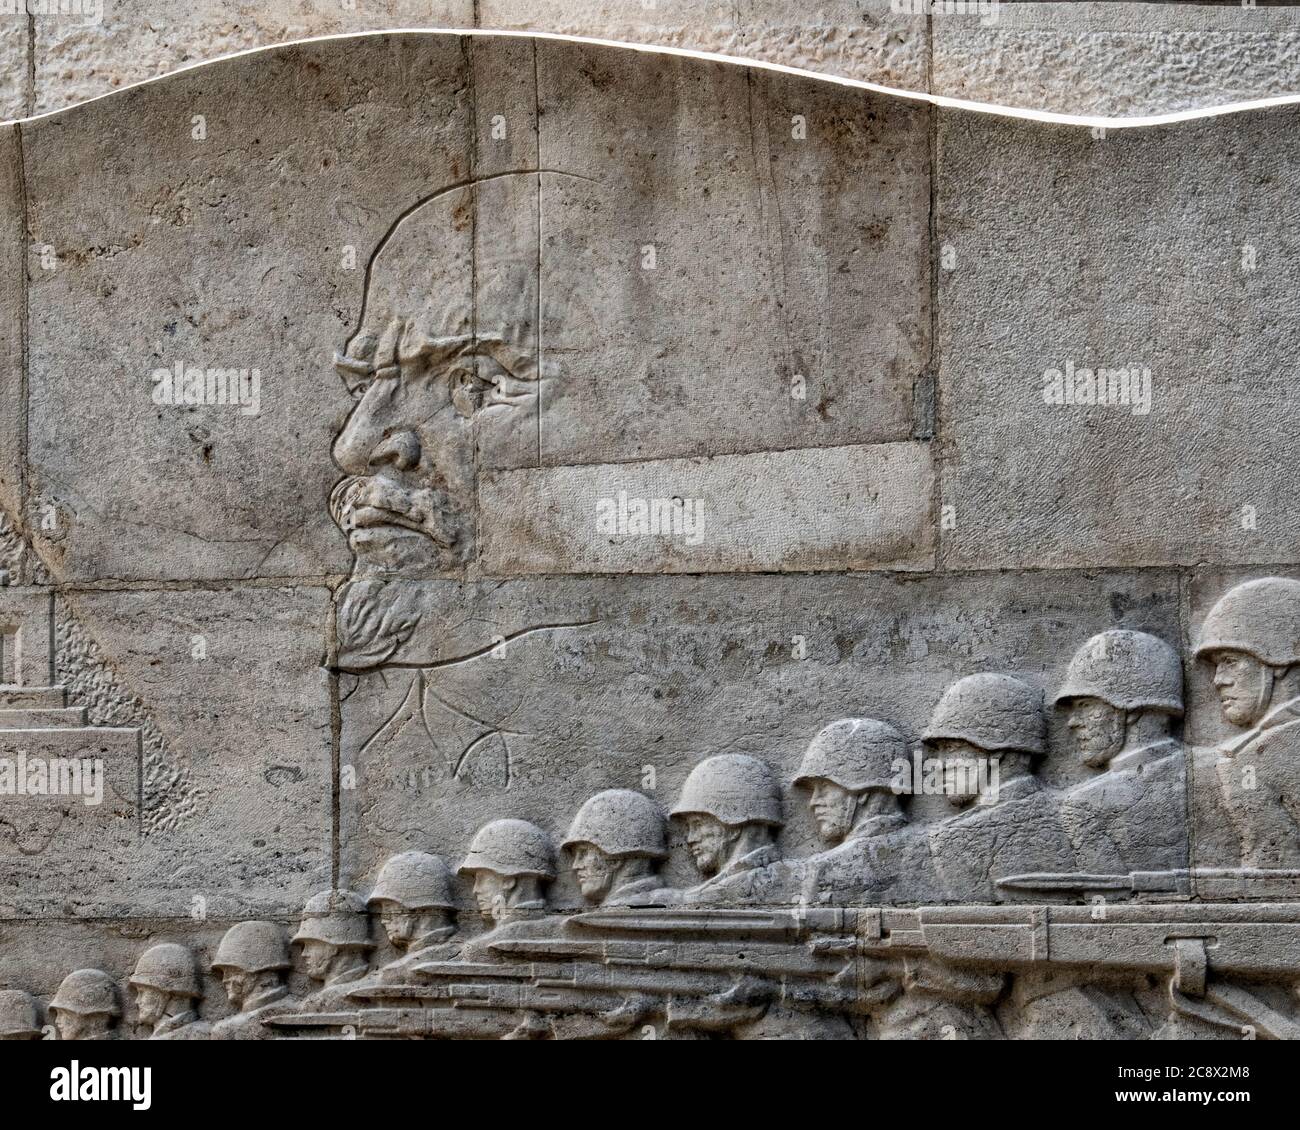 Sarcophagus  with relief carving of Military scene at the Soviet War Memorial in Treptow Park,Berlin,Germany Stock Photo